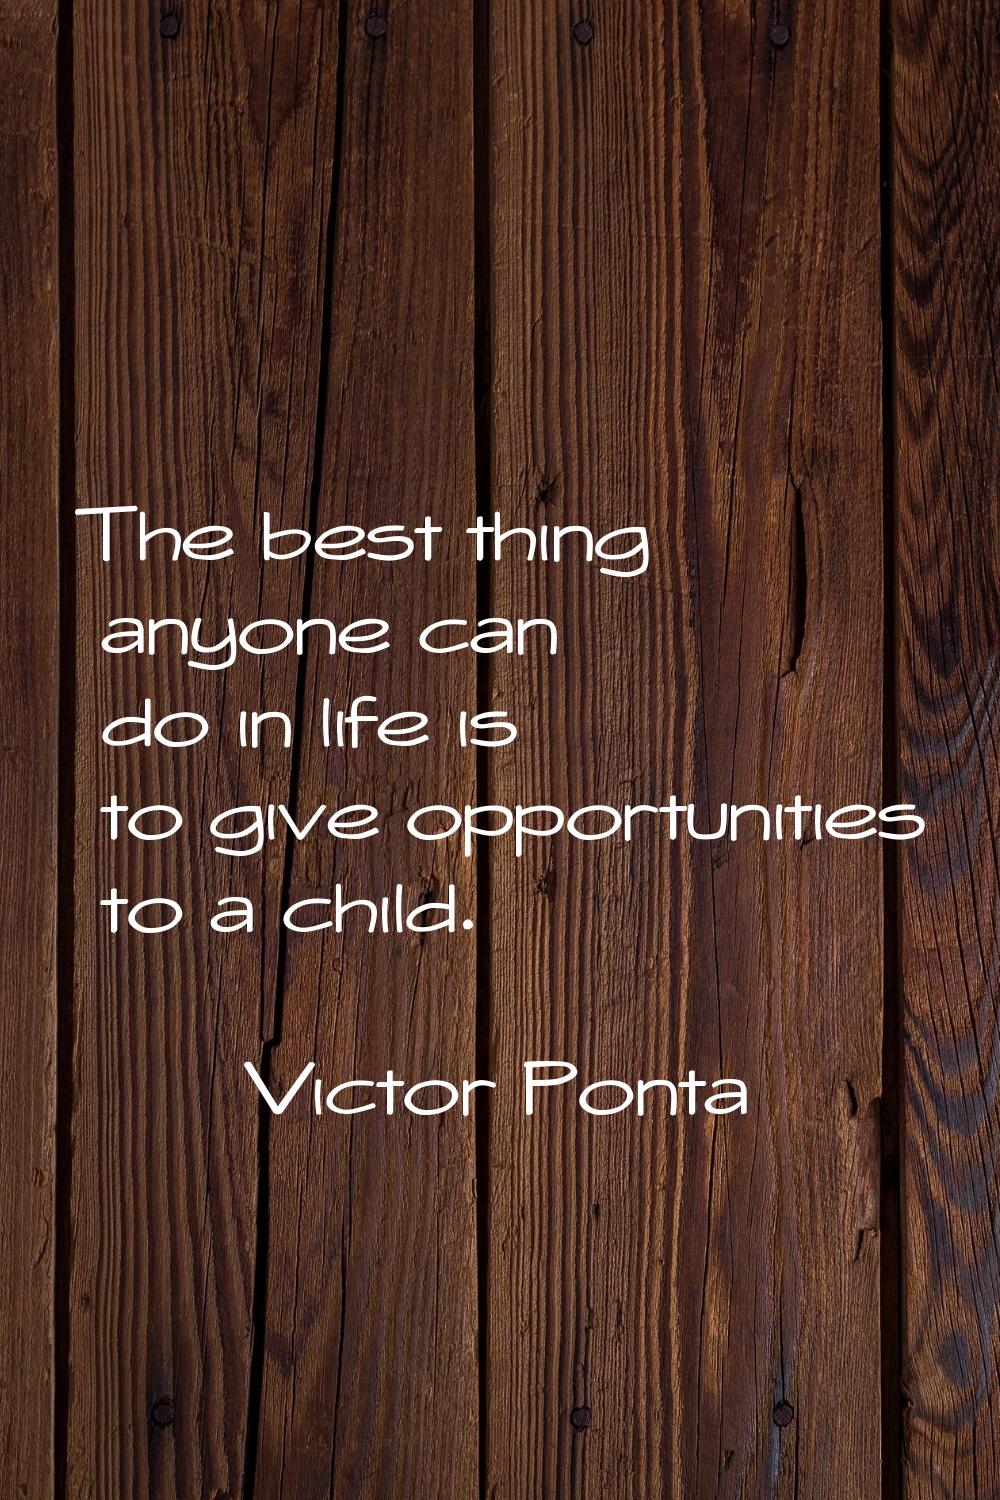 The best thing anyone can do in life is to give opportunities to a child.